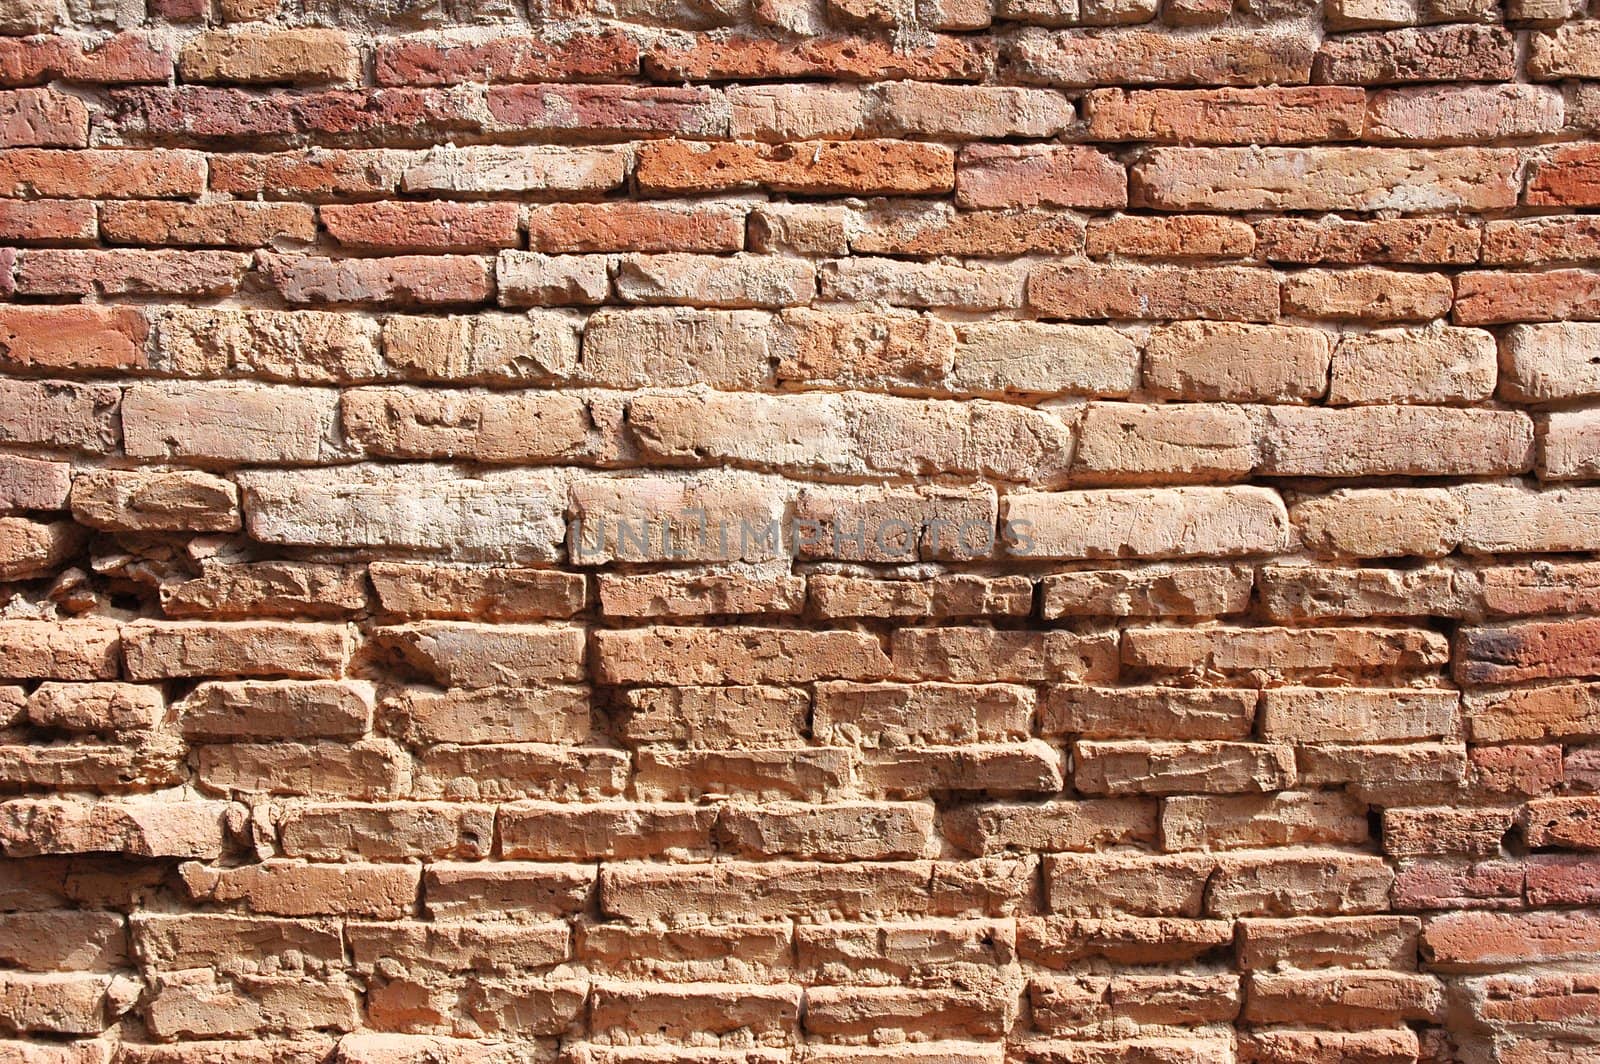 Texture of rough red brick wall surface